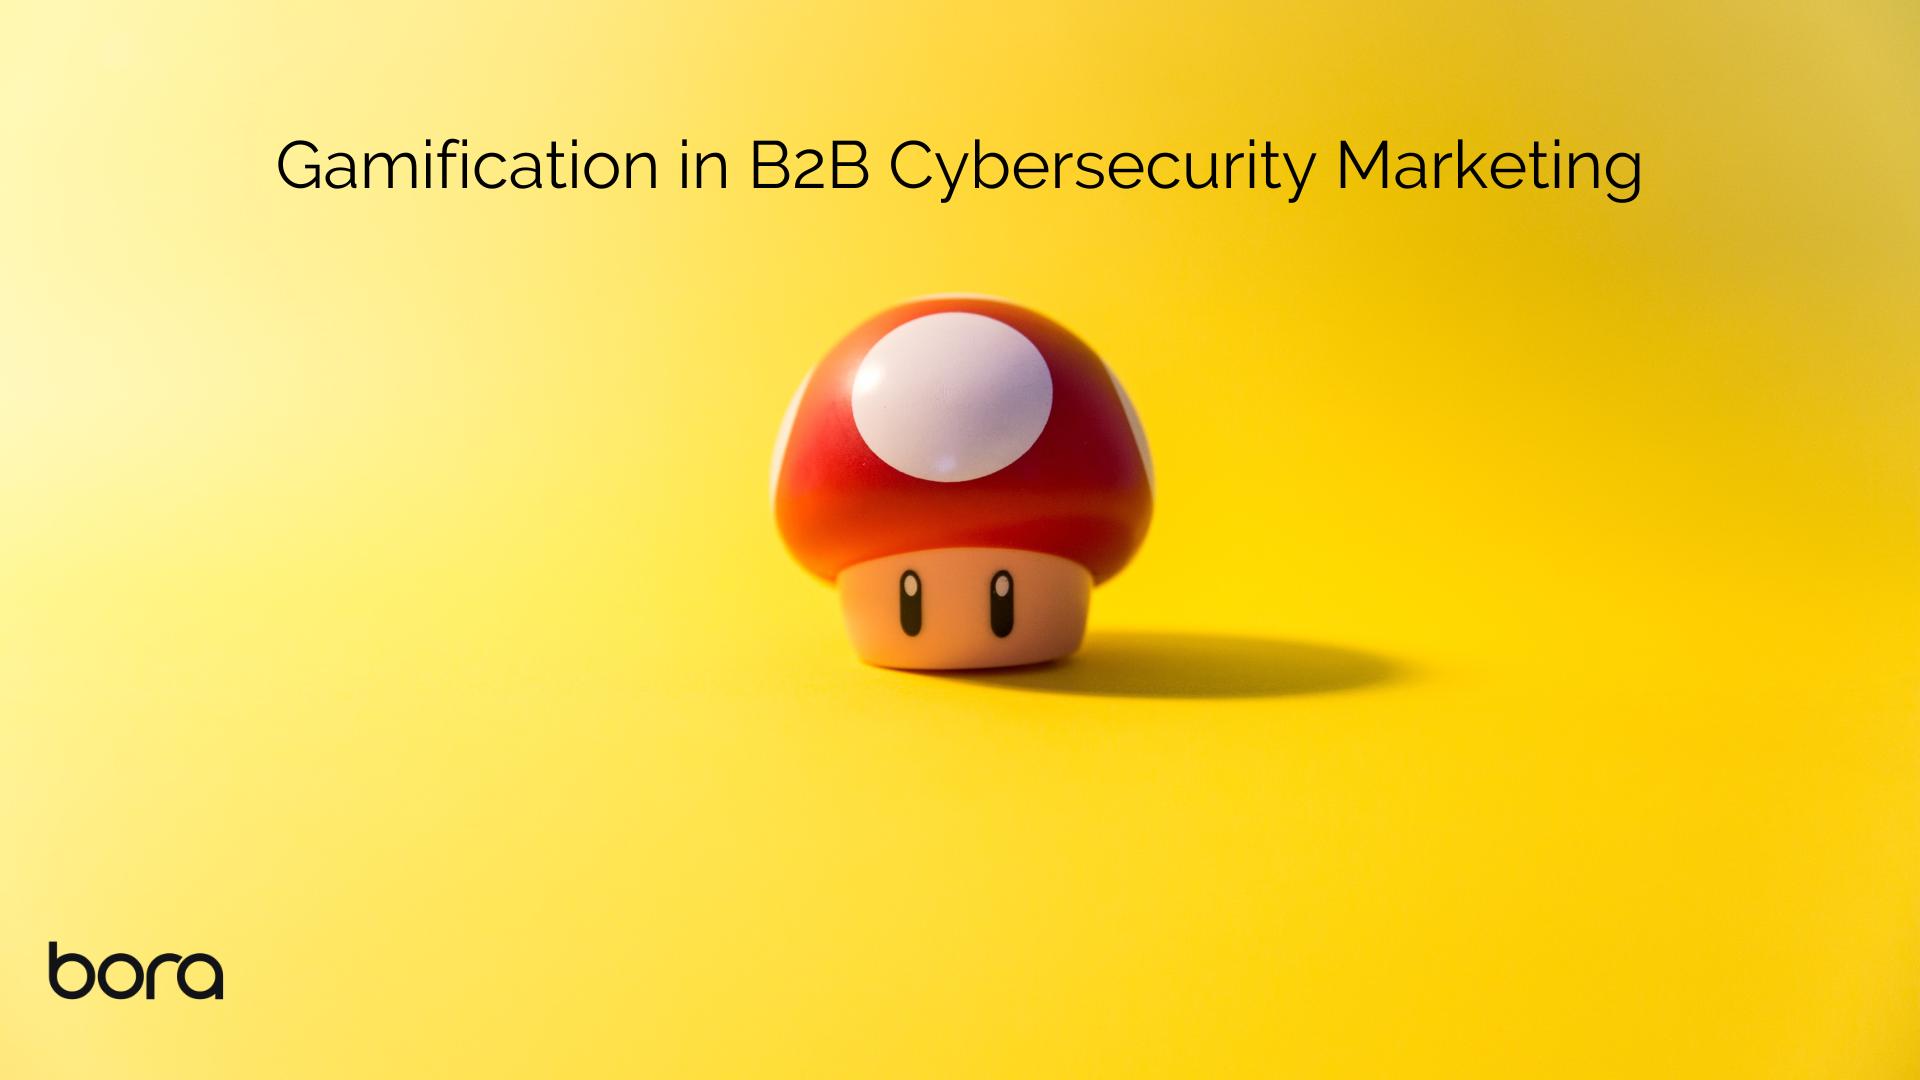 Gamification in B2B Cybersecurity Marketing